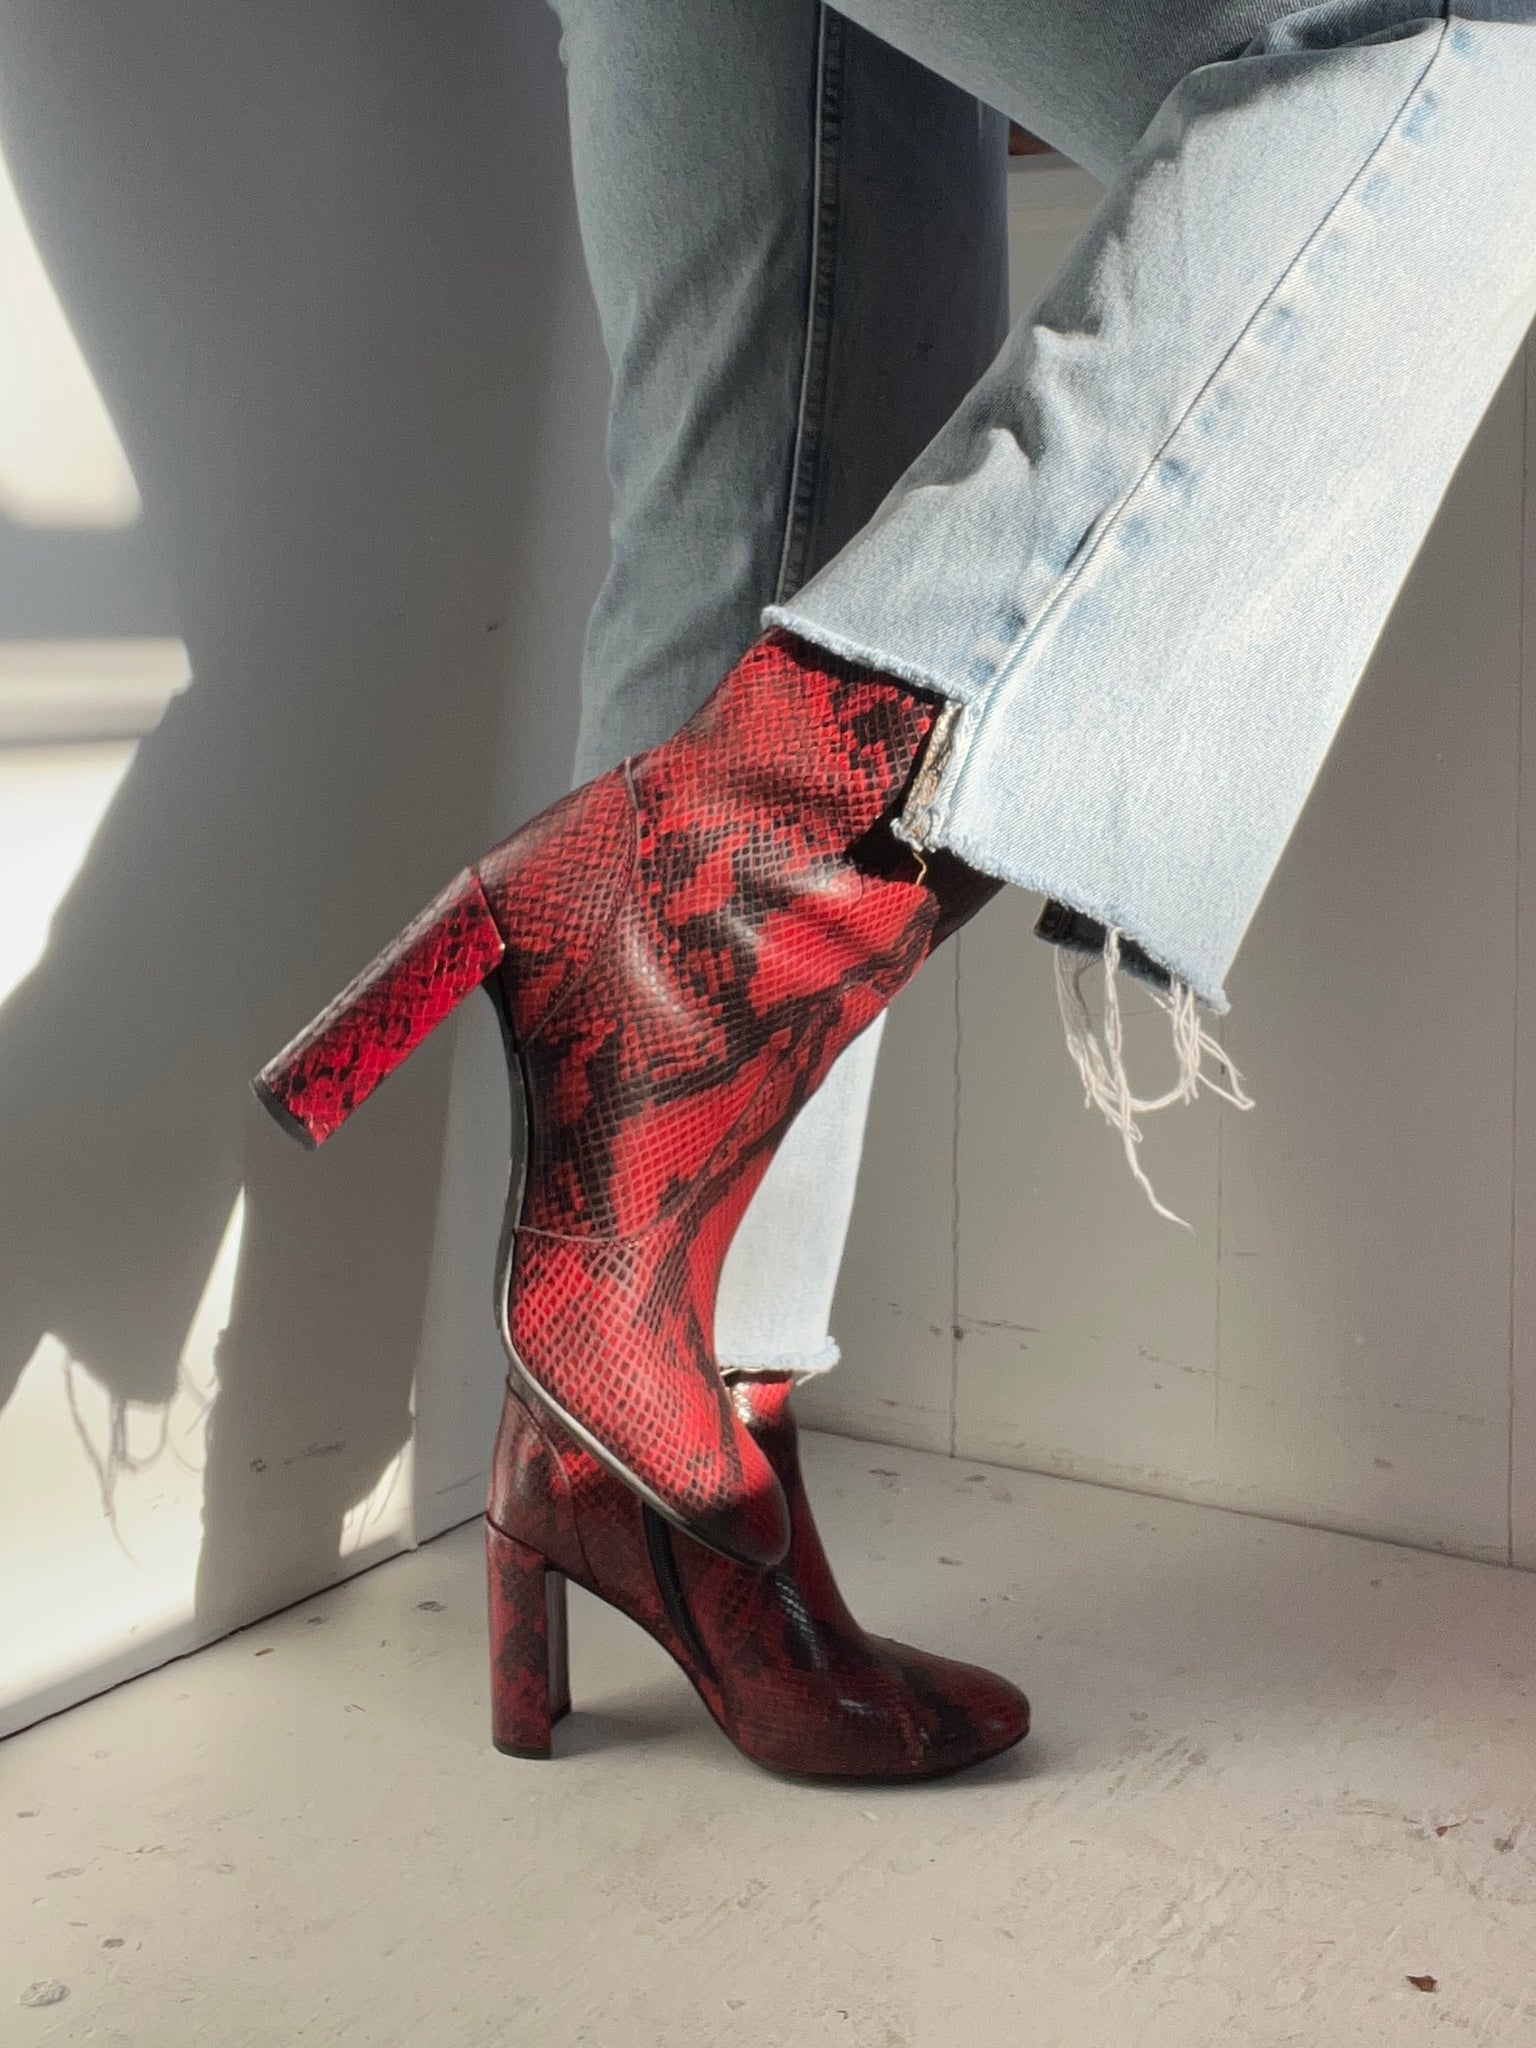 Red Leather Snakeskin Boots